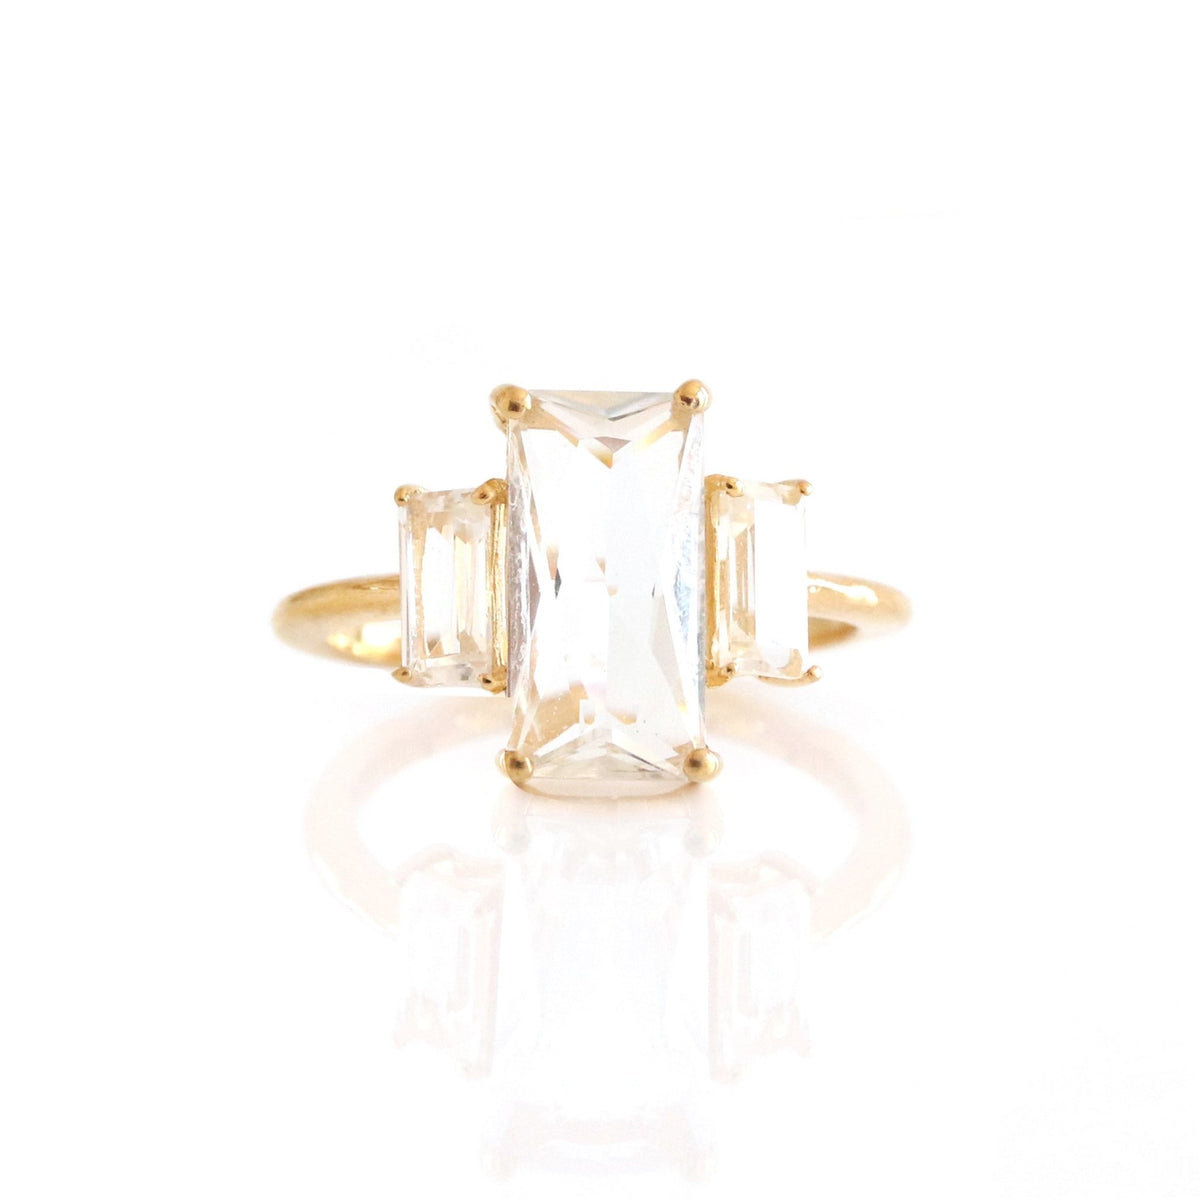 Loyal Cocktail Ring - White Topaz &amp; Gold - SO PRETTY CARA COTTER